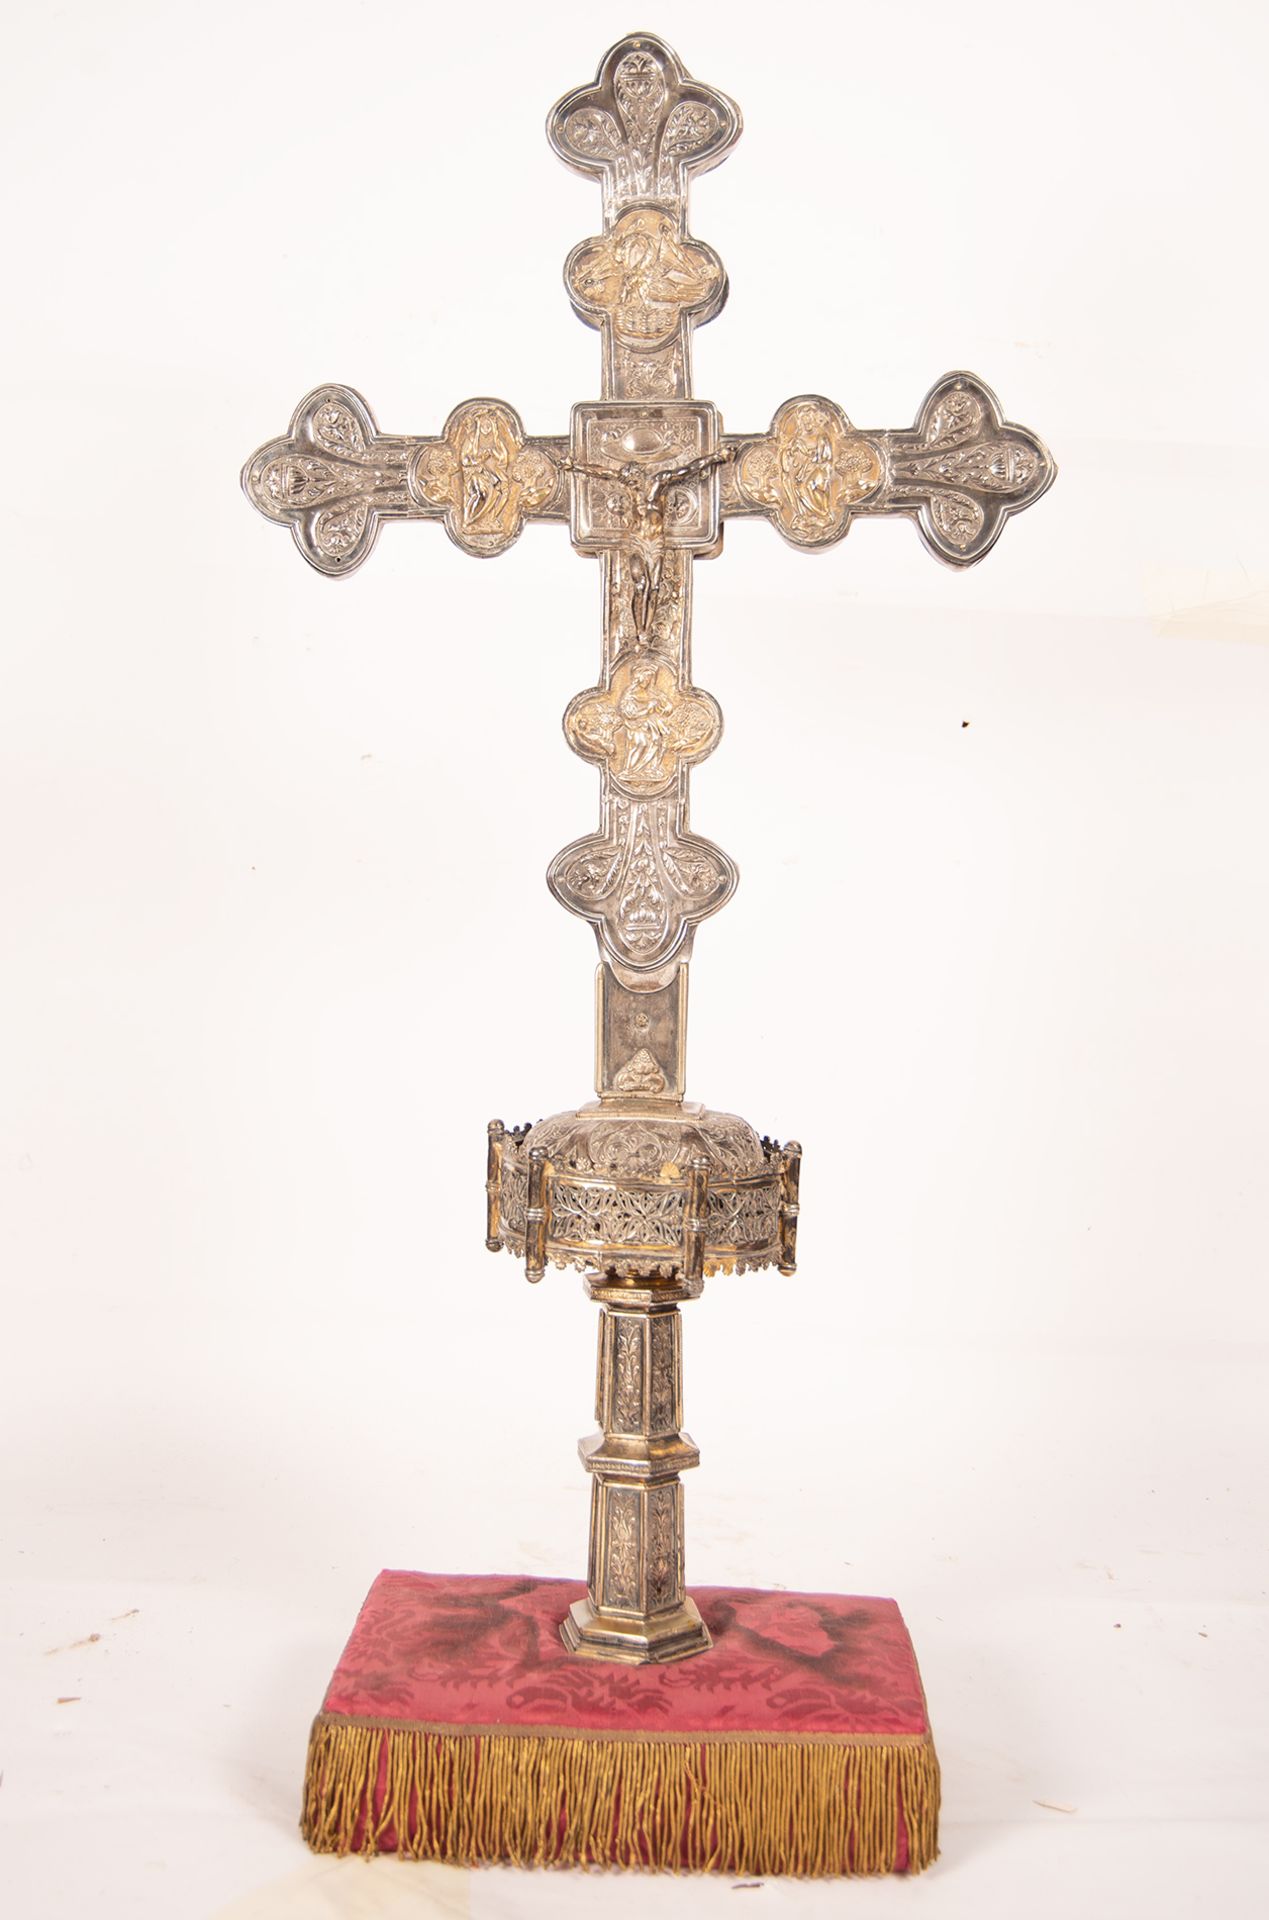 Large Plateresque Processional Cross in Silver, Spain, 16th century